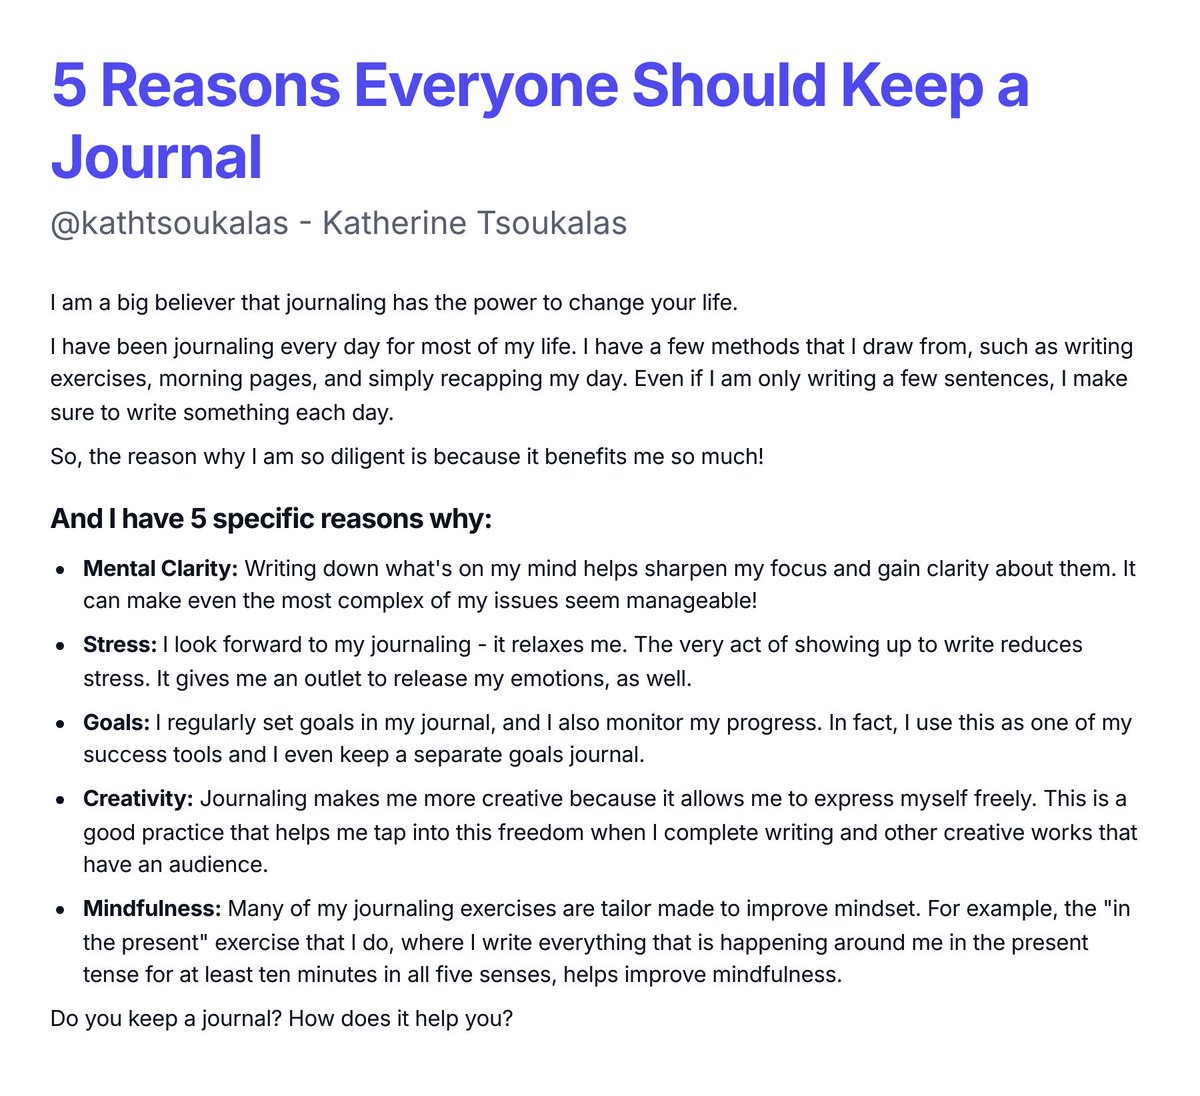 Day 9 of Ship 30 for 30 - 5 Reasons Everyone Should Keep a Journal